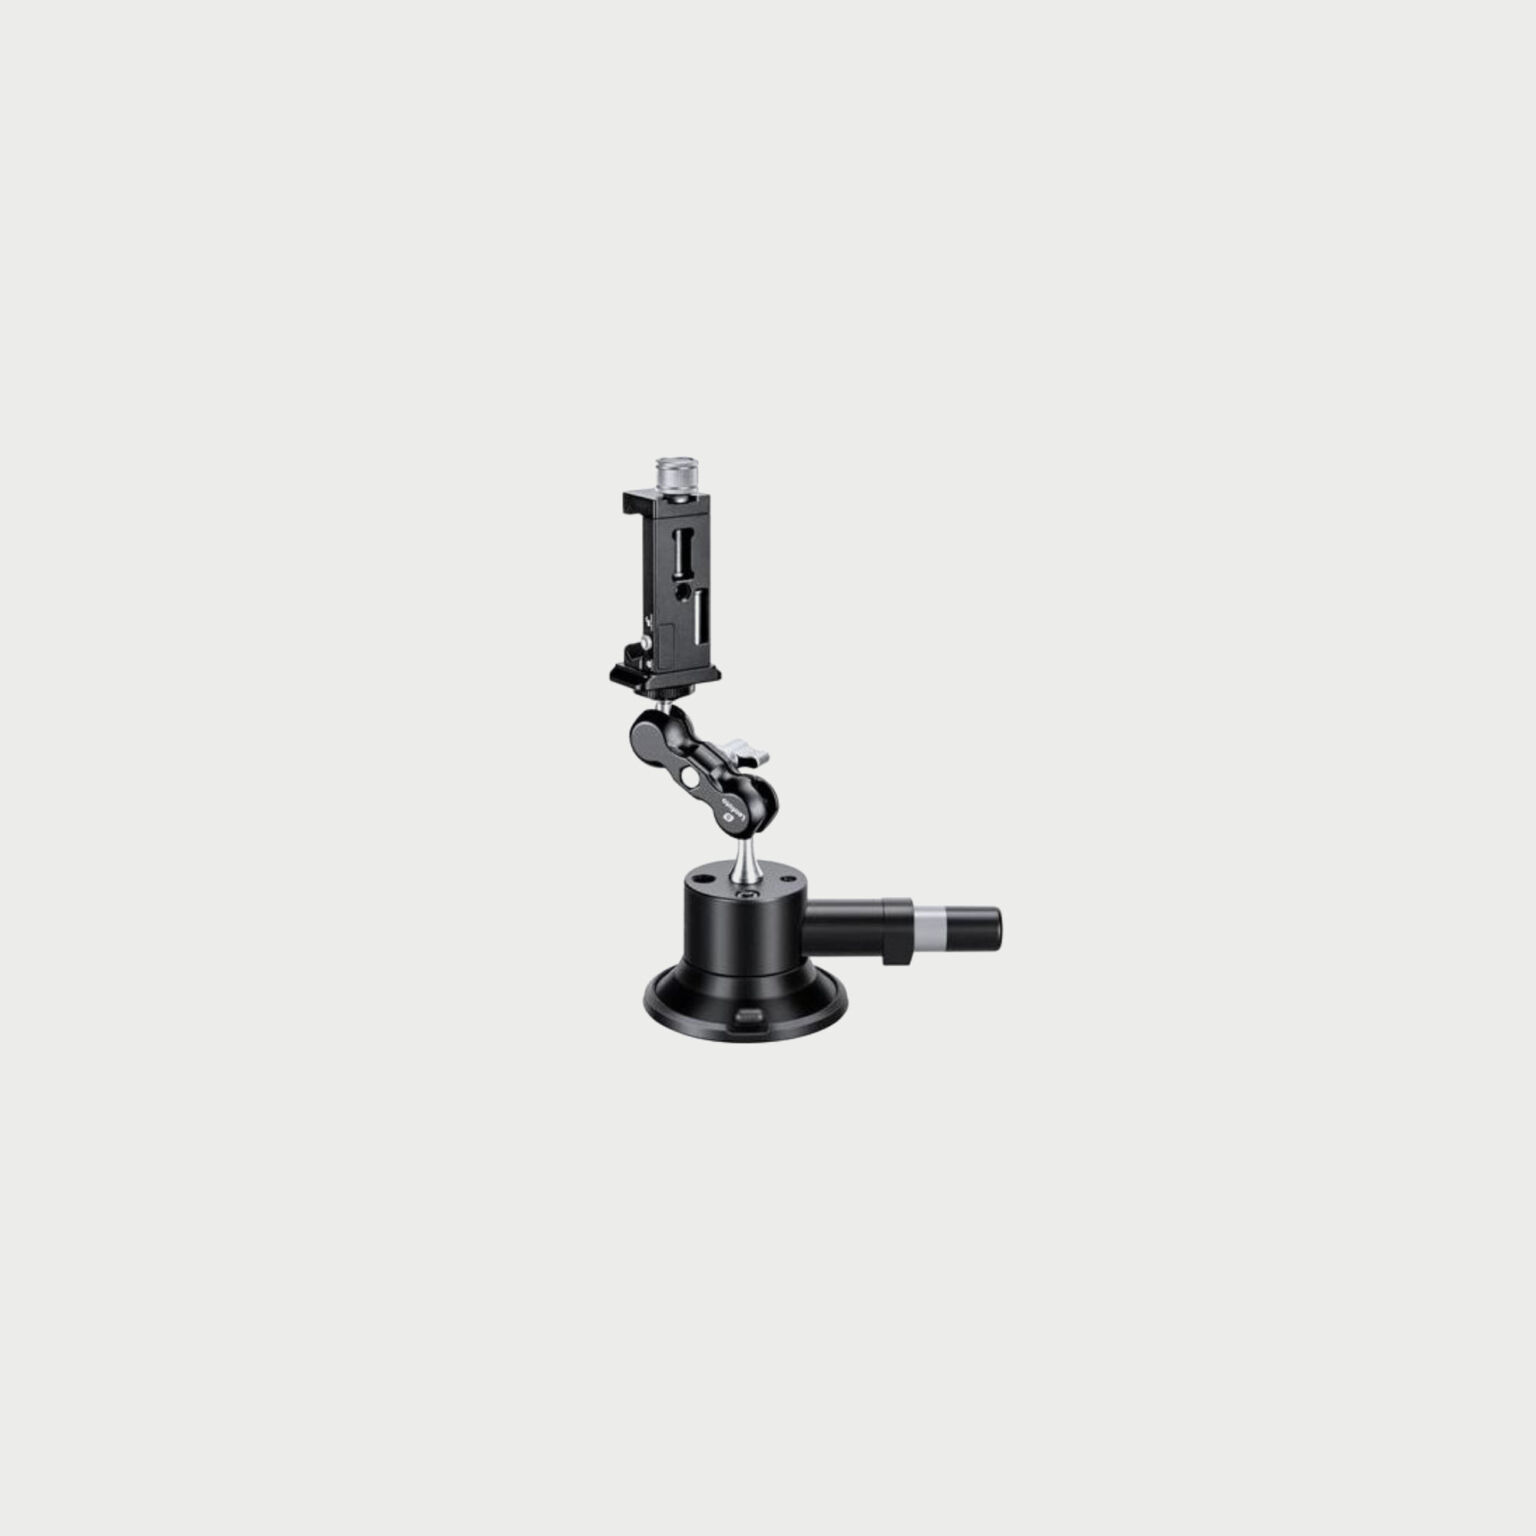 Leofoto Sc 01 Kit With Arm And Pc 90ii Phone Clamp